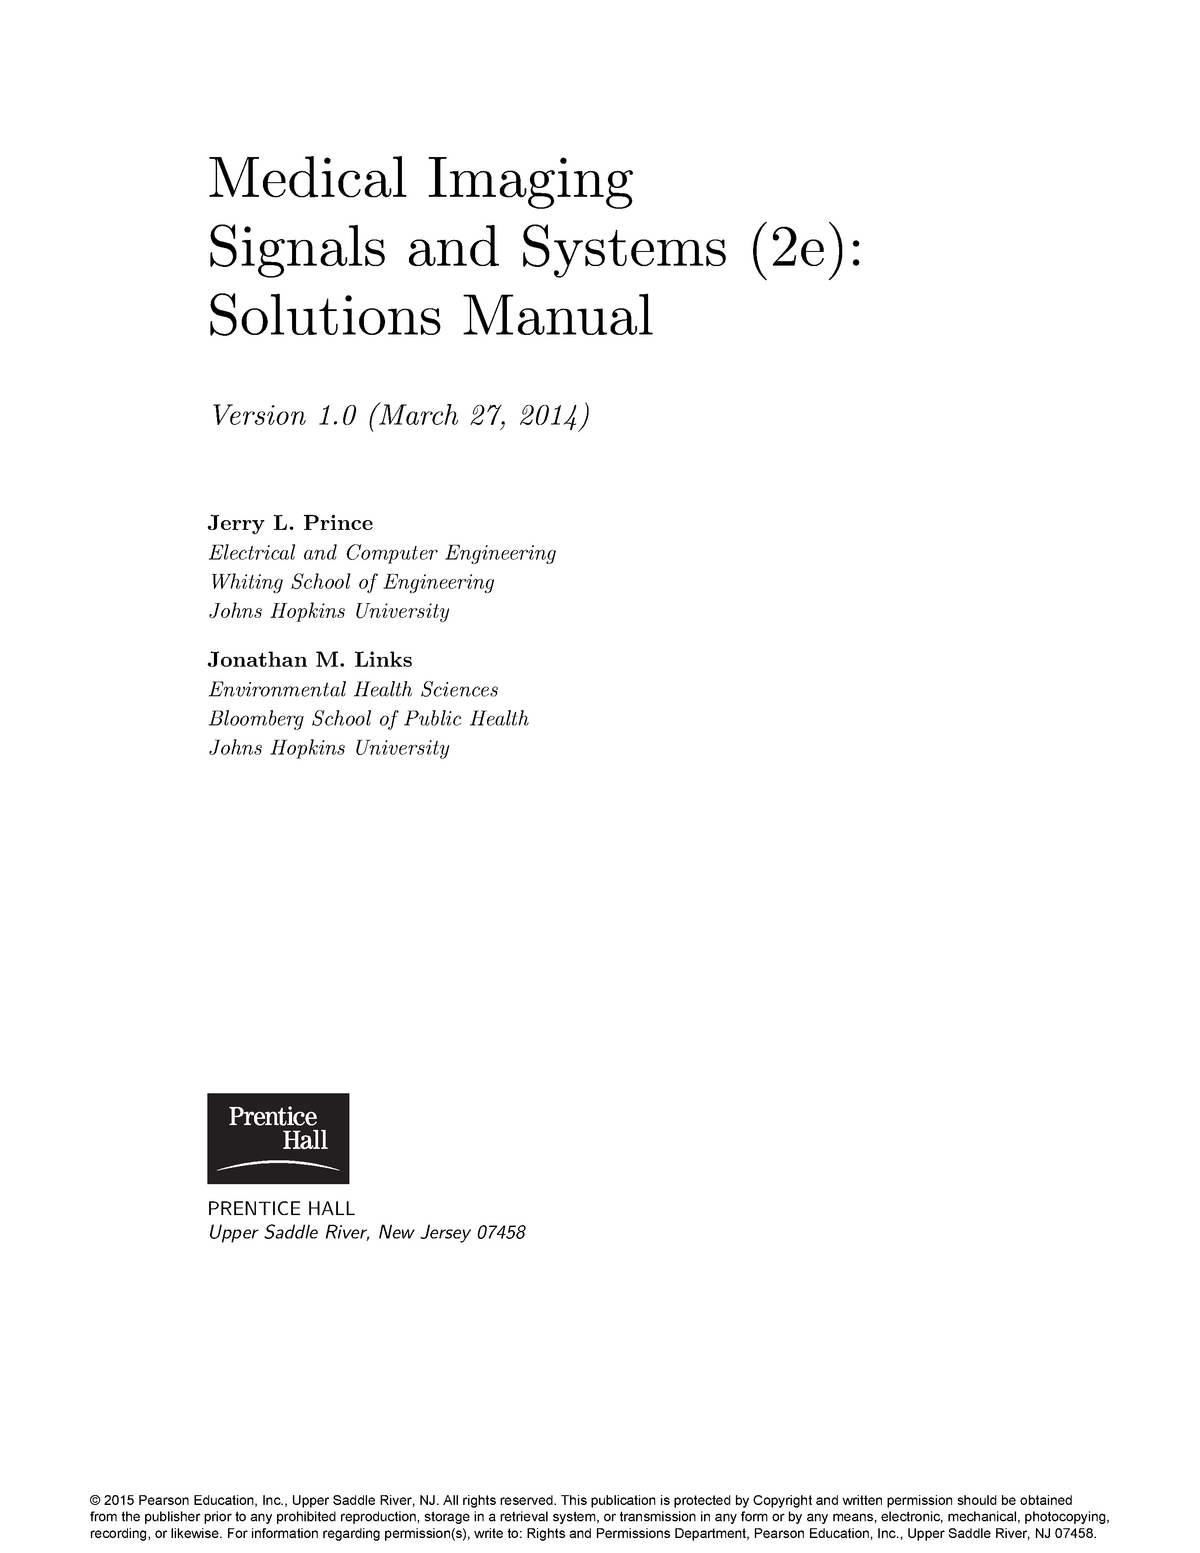 Medical imaging signals and systems pdf download proxy server free download for windows 10